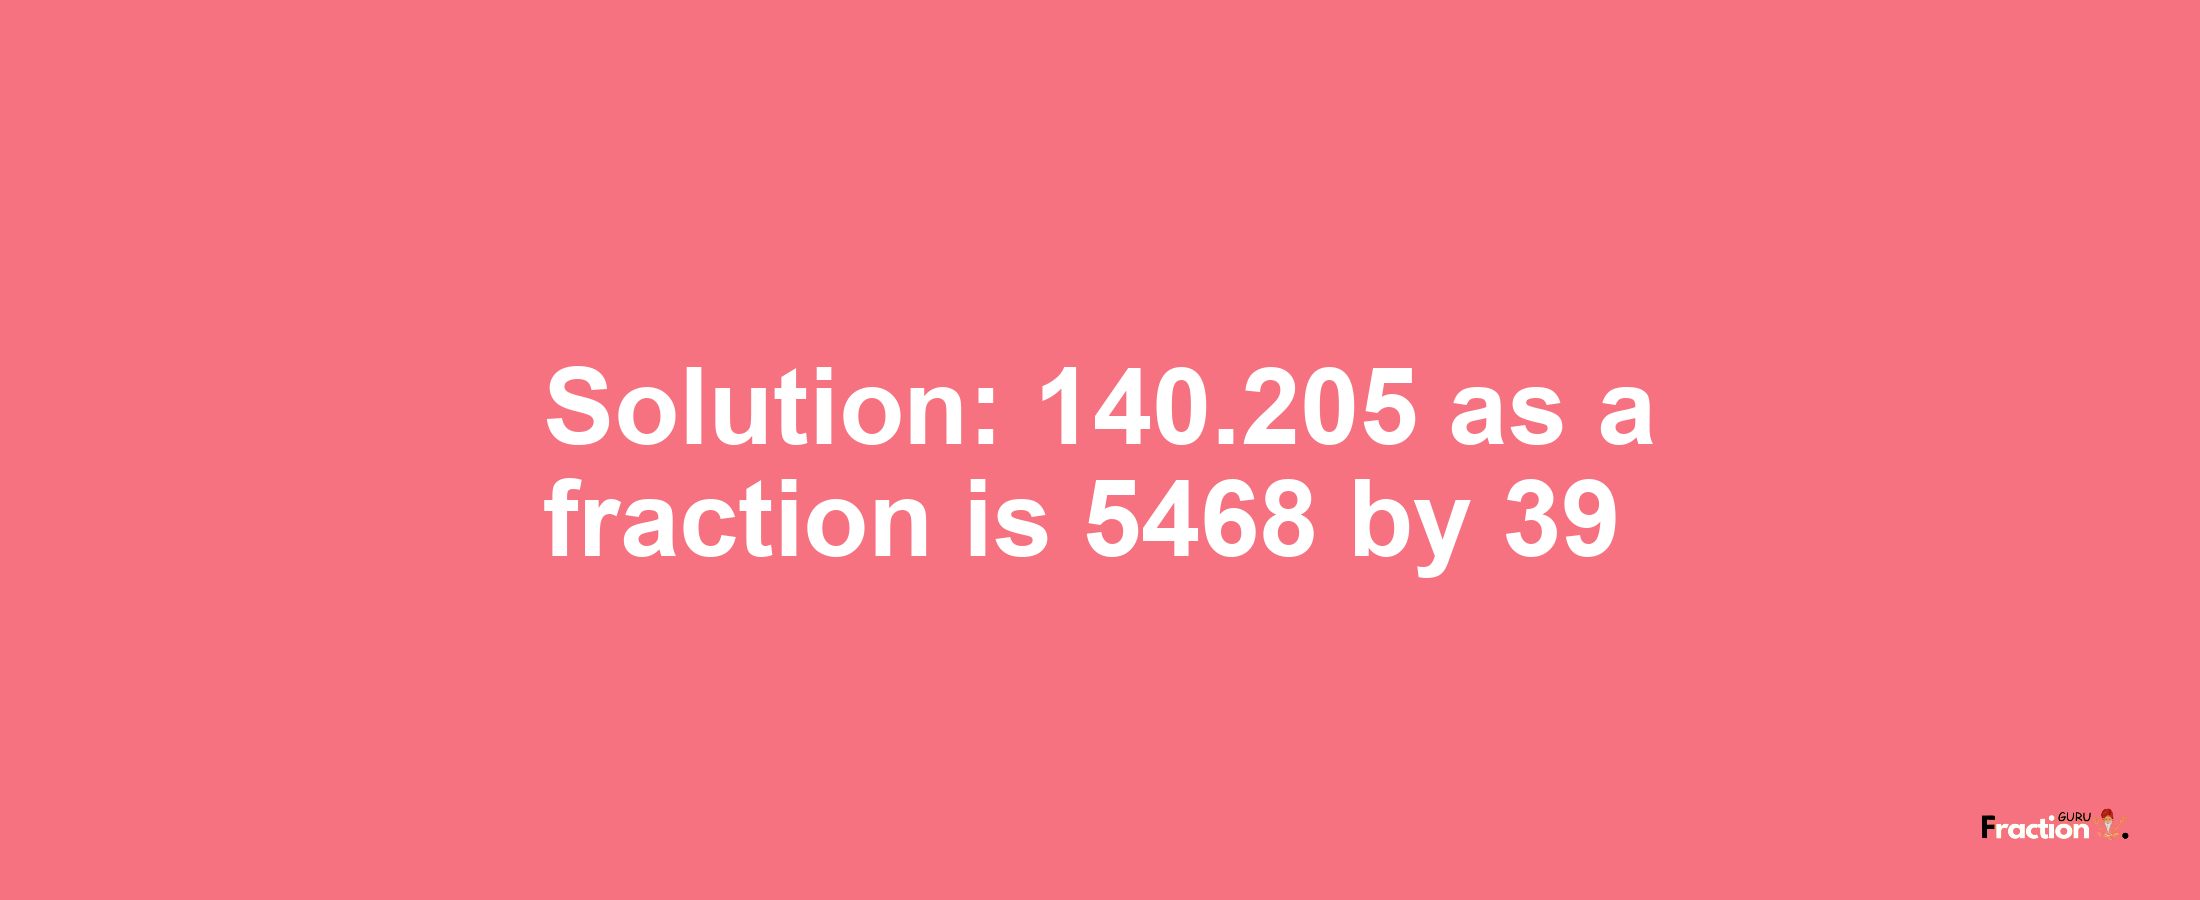 Solution:140.205 as a fraction is 5468/39